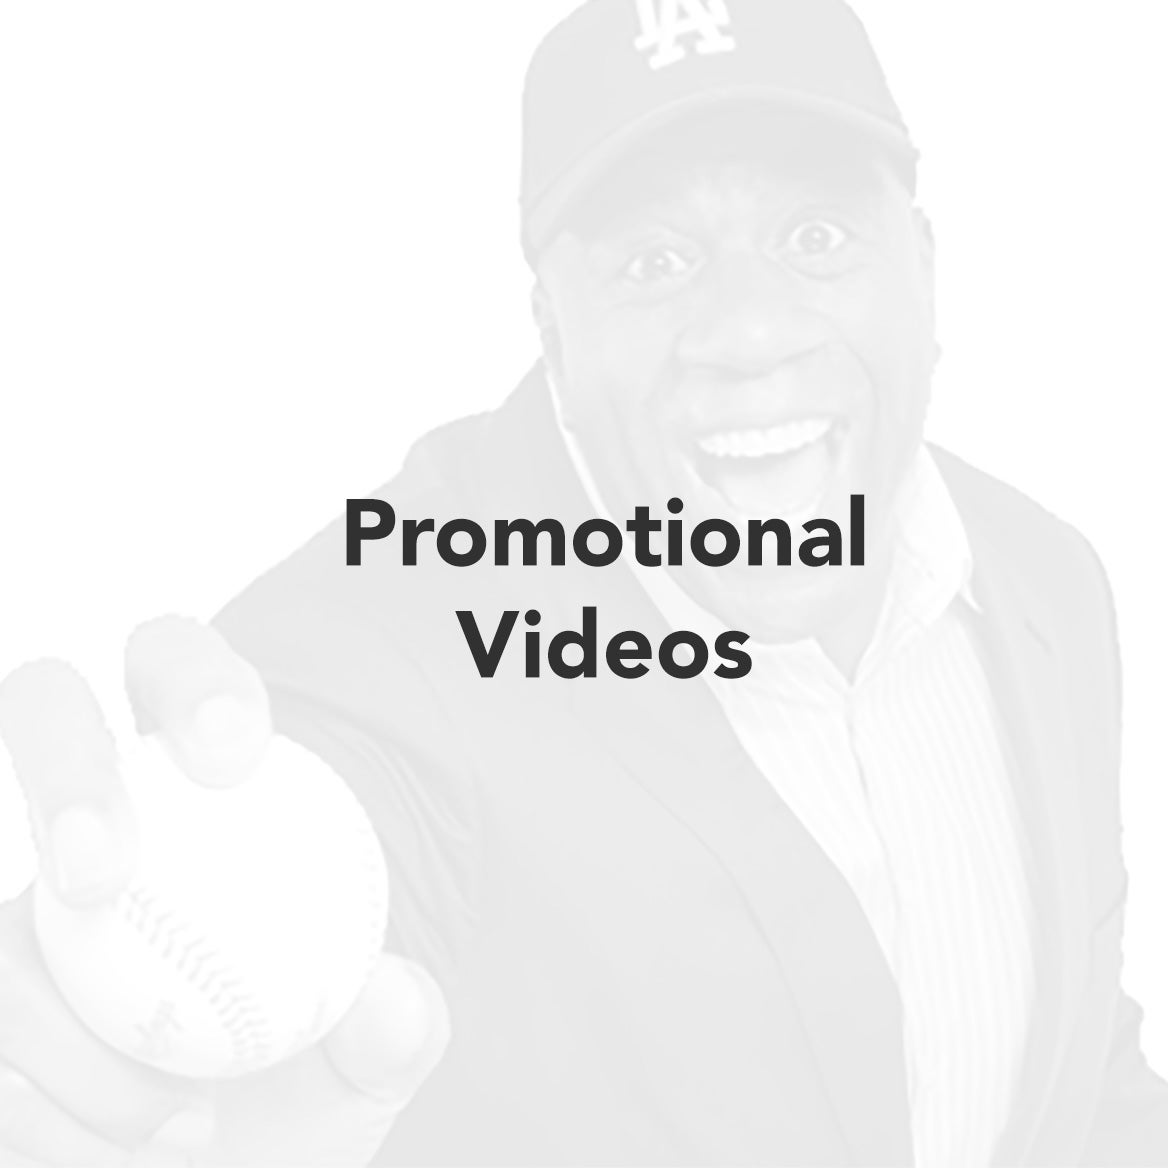 Promotional Videos